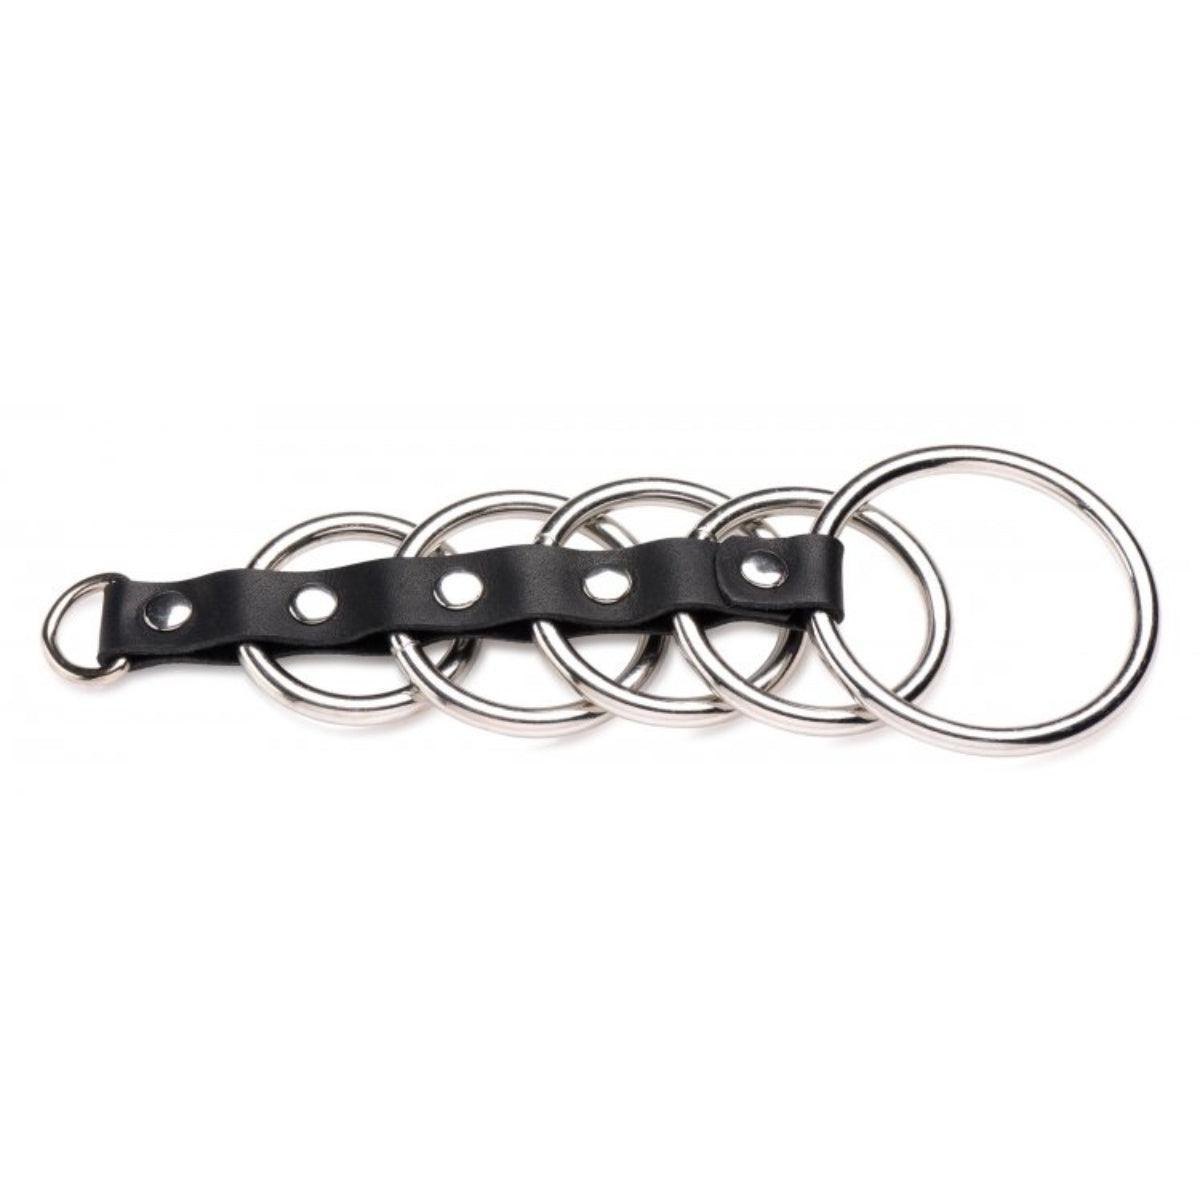 Strict Leather Cock Gear Gates Of Hell Leather Chastity Device